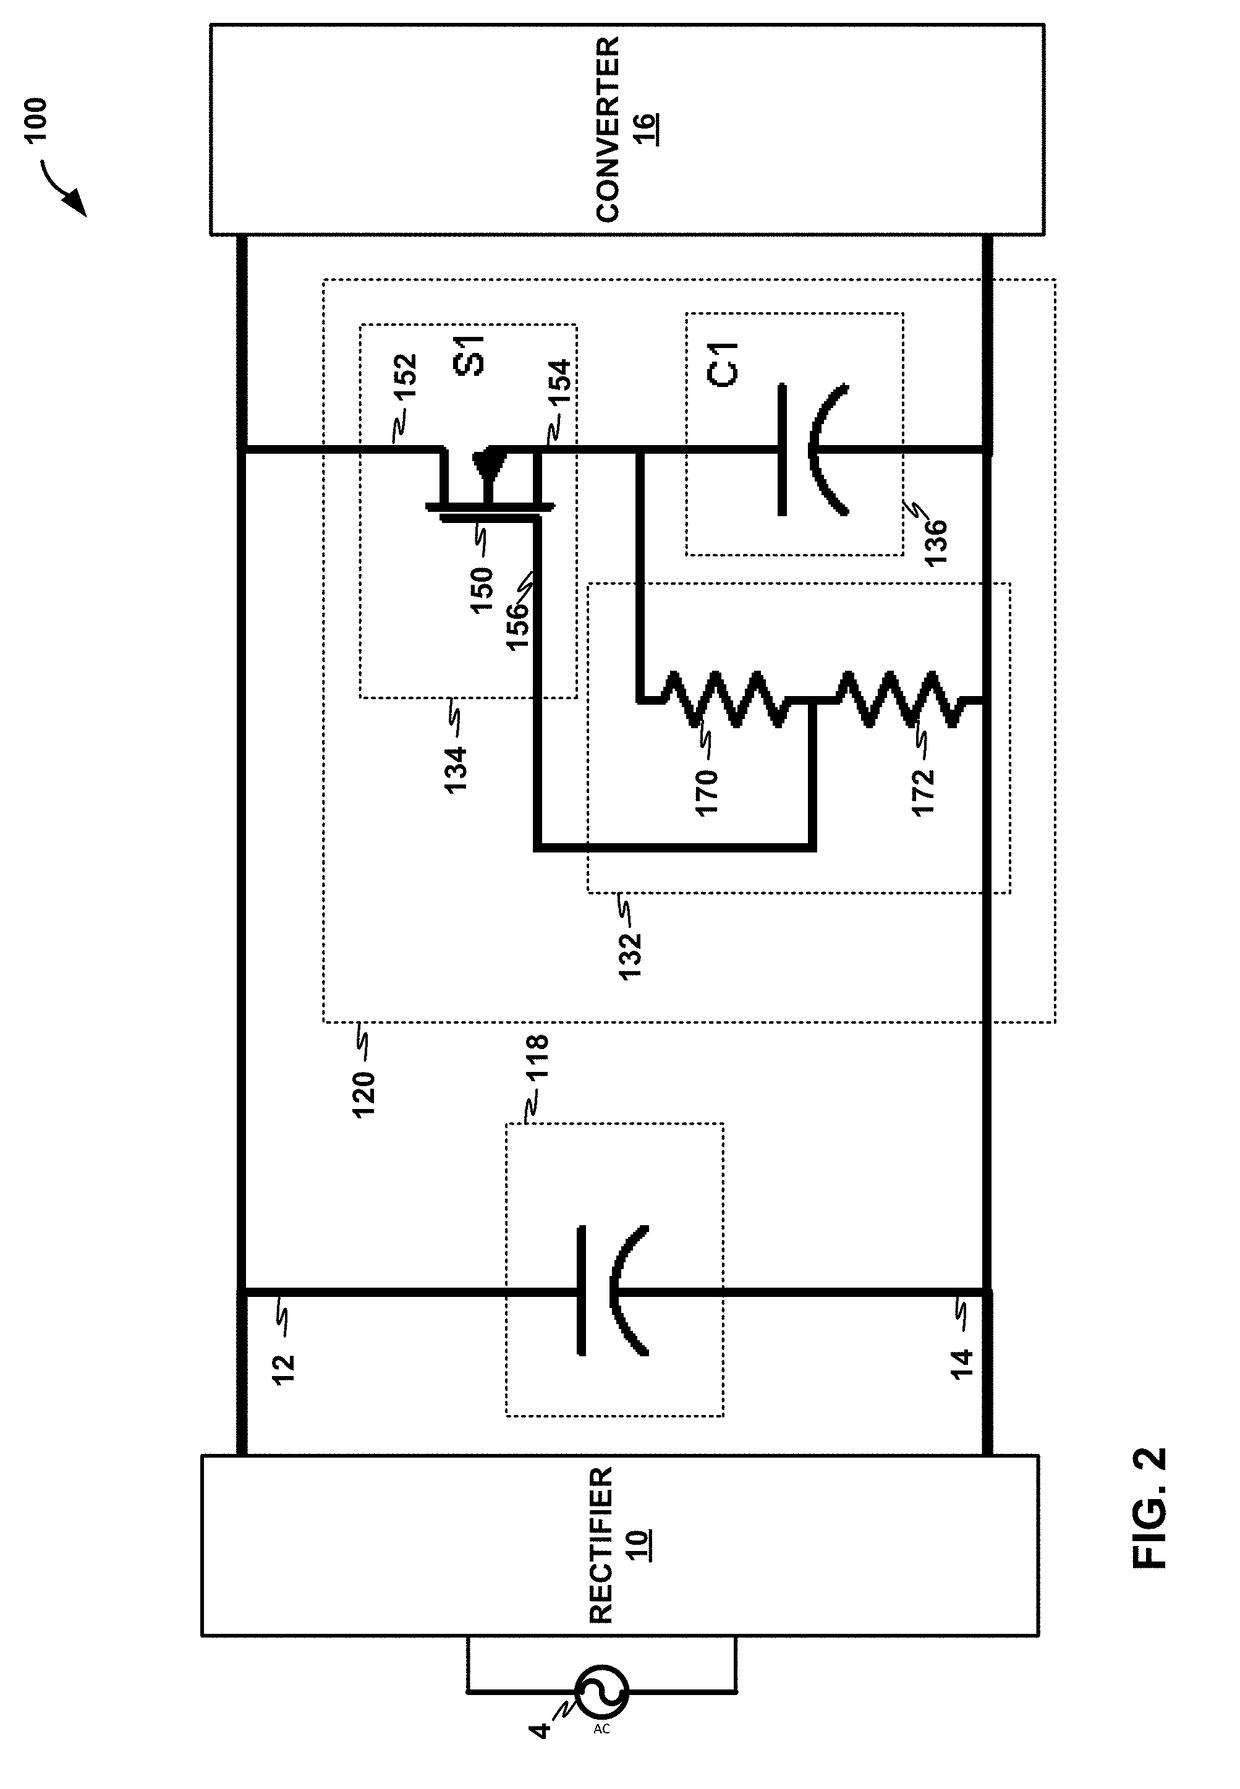 Voltage doubler with capacitor module for increasing capacitance